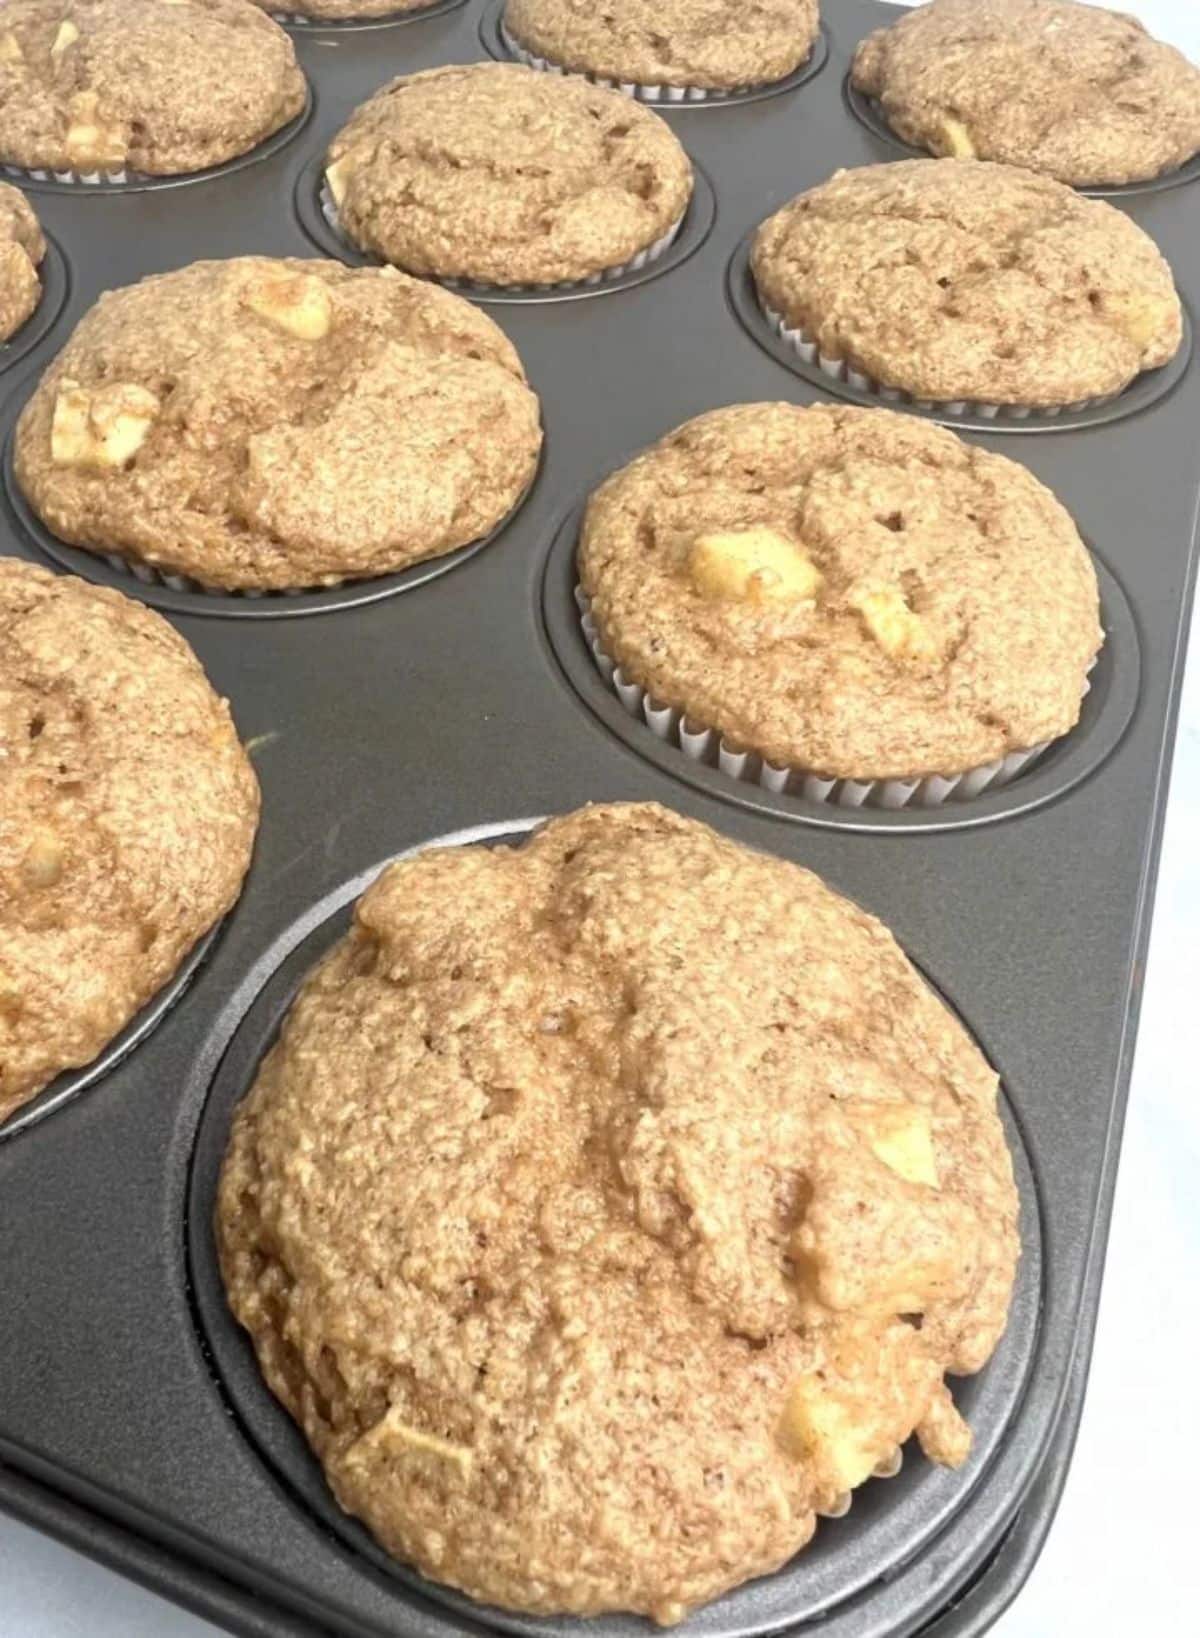 Tasty three-ingredient apple spice muffins in a muffin tray.